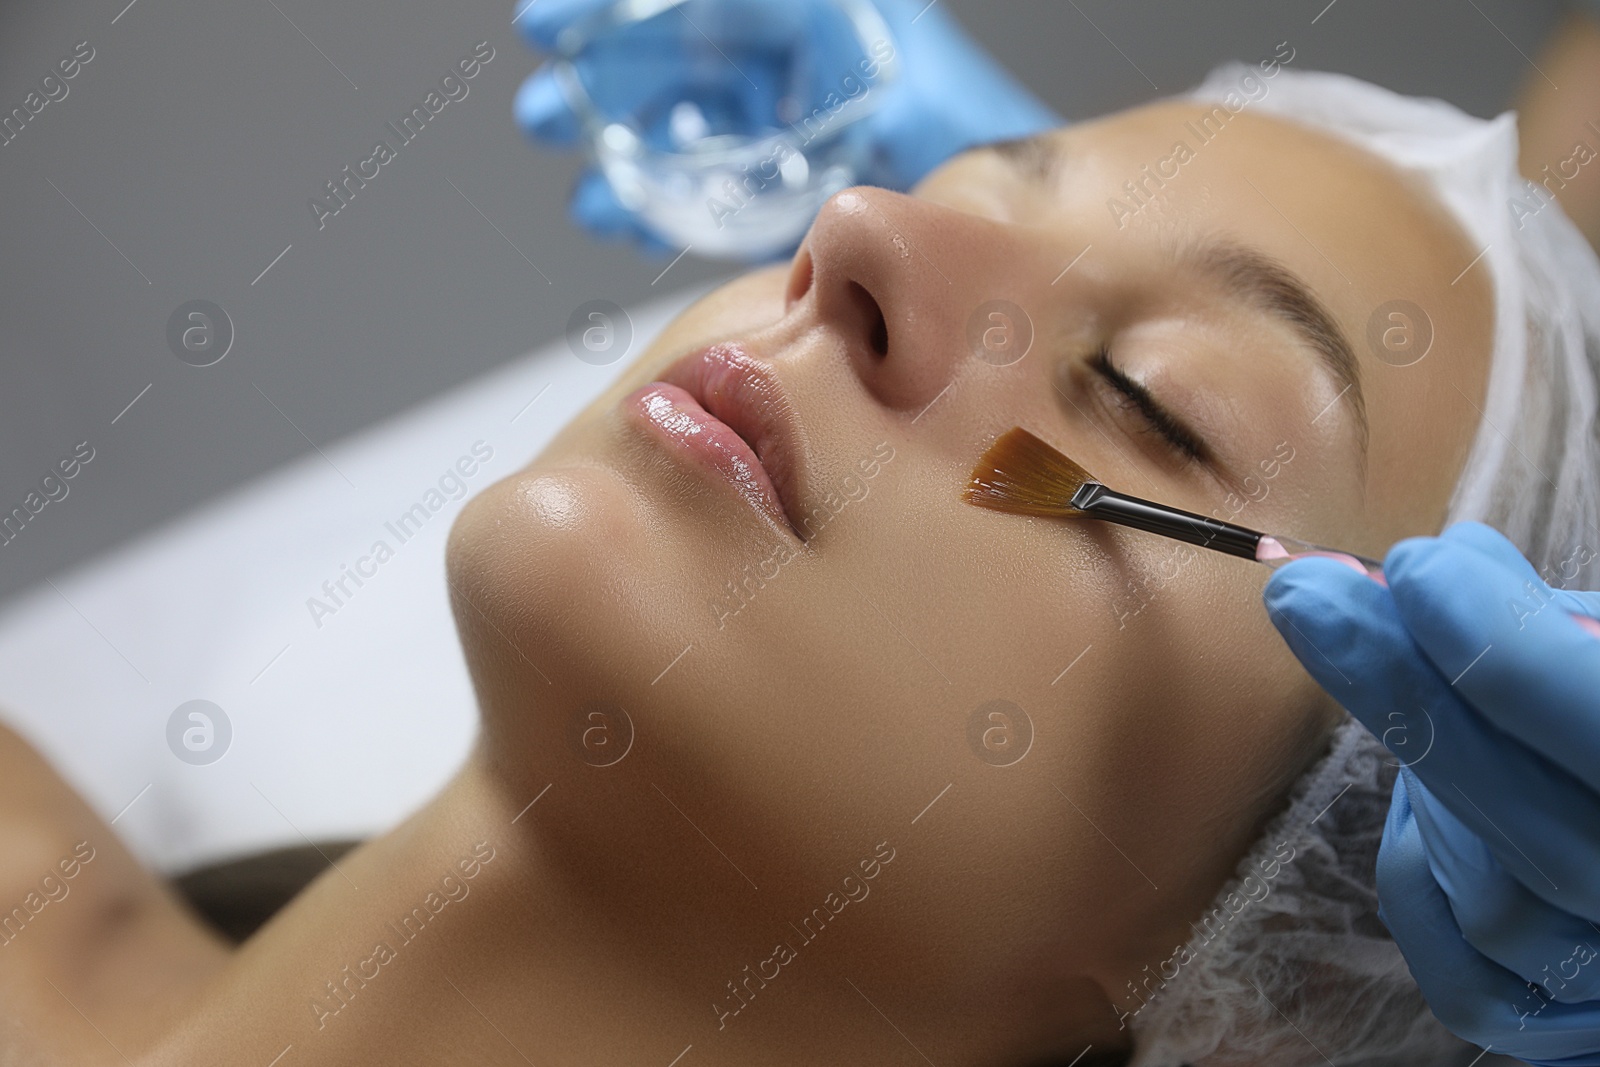 Photo of Young woman during face peeling procedure in salon, closeup